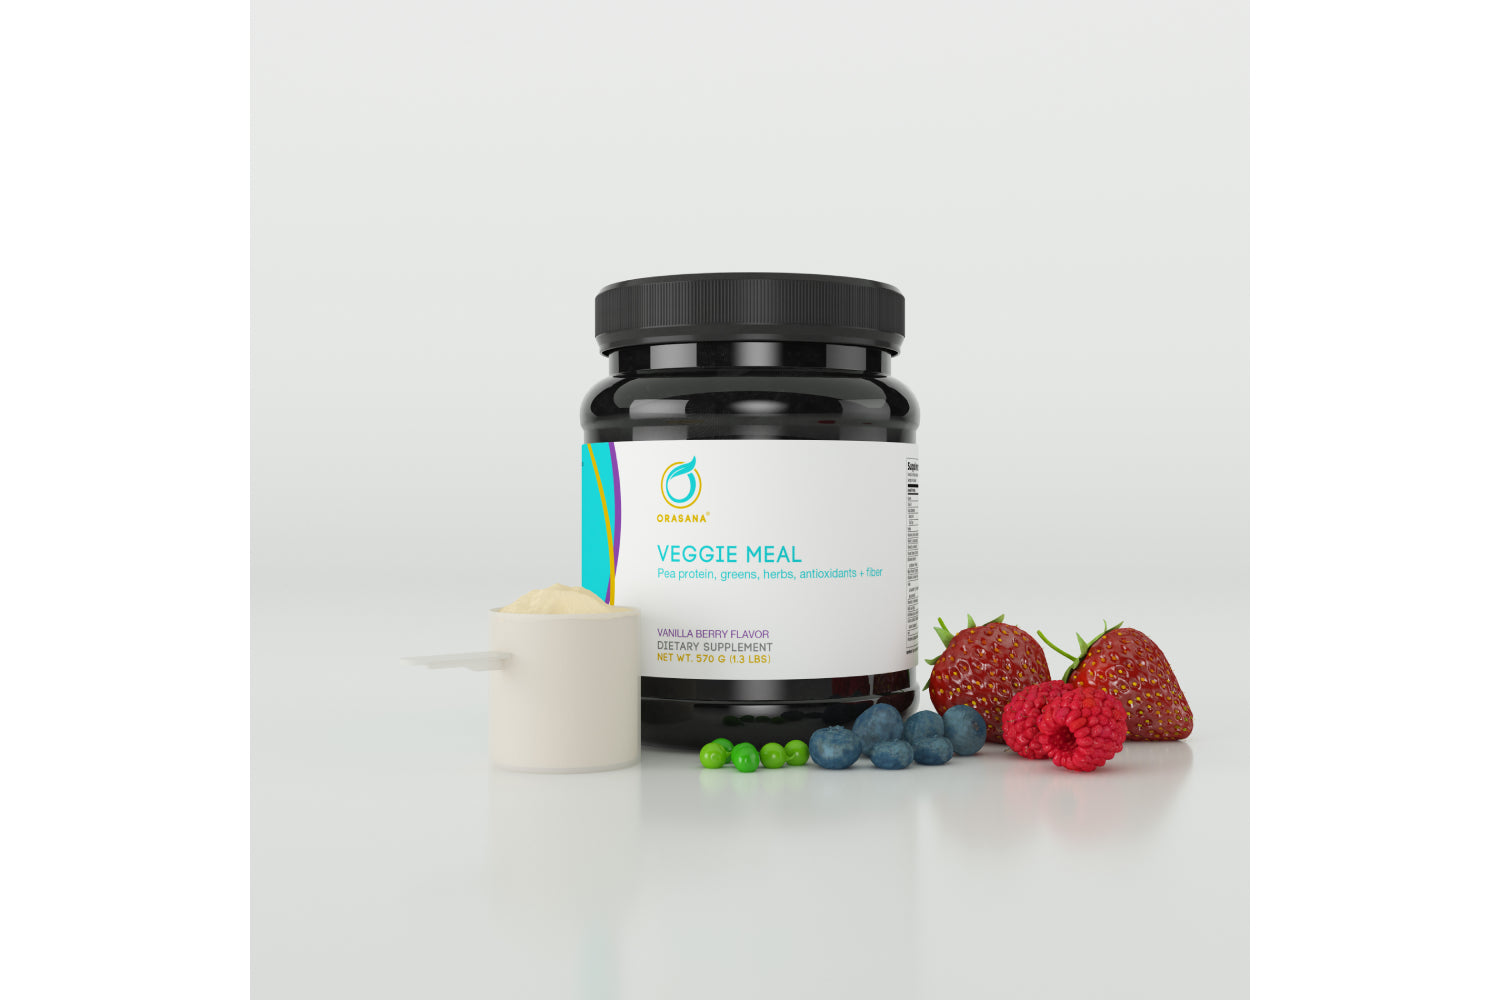 2023 Veggie meal is a dairy-free, plant-derived powder especially designed to include all nutrients necessary in a full meal, featuring pea protein isolate as its protein source